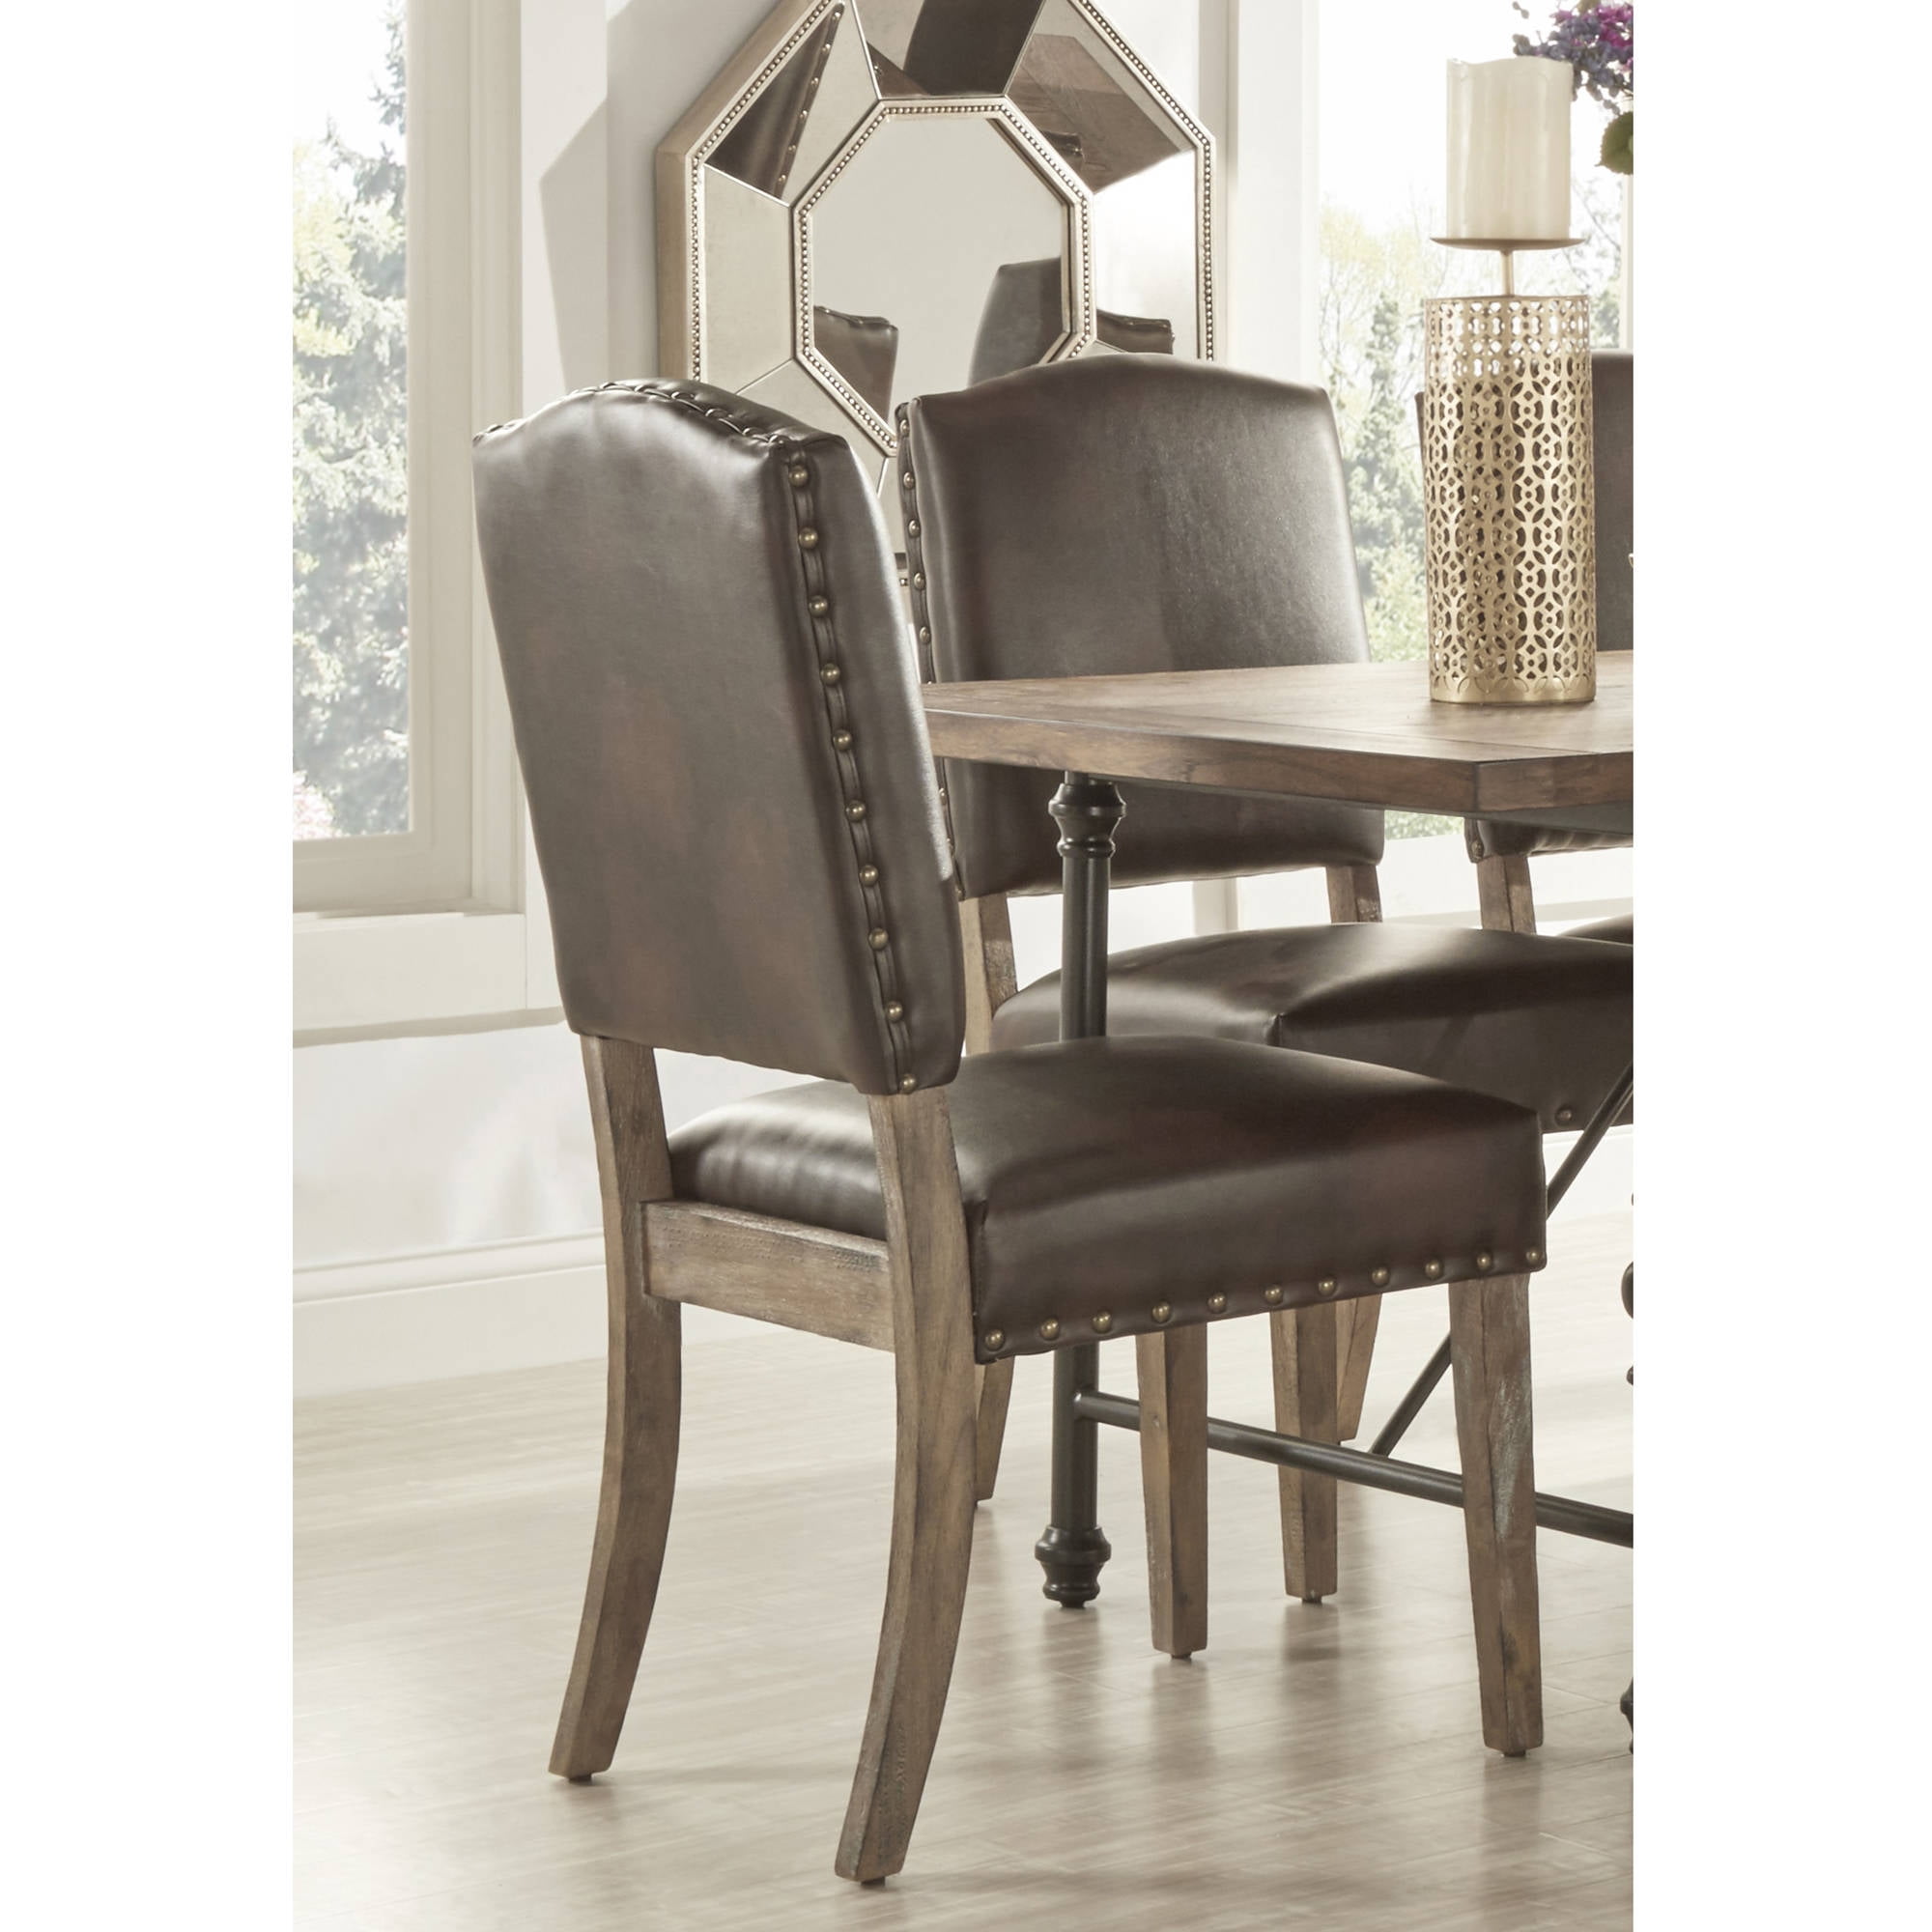 Weston Home Nailhead Upholstered and Wood Dining Chair, Set of 2, Brown